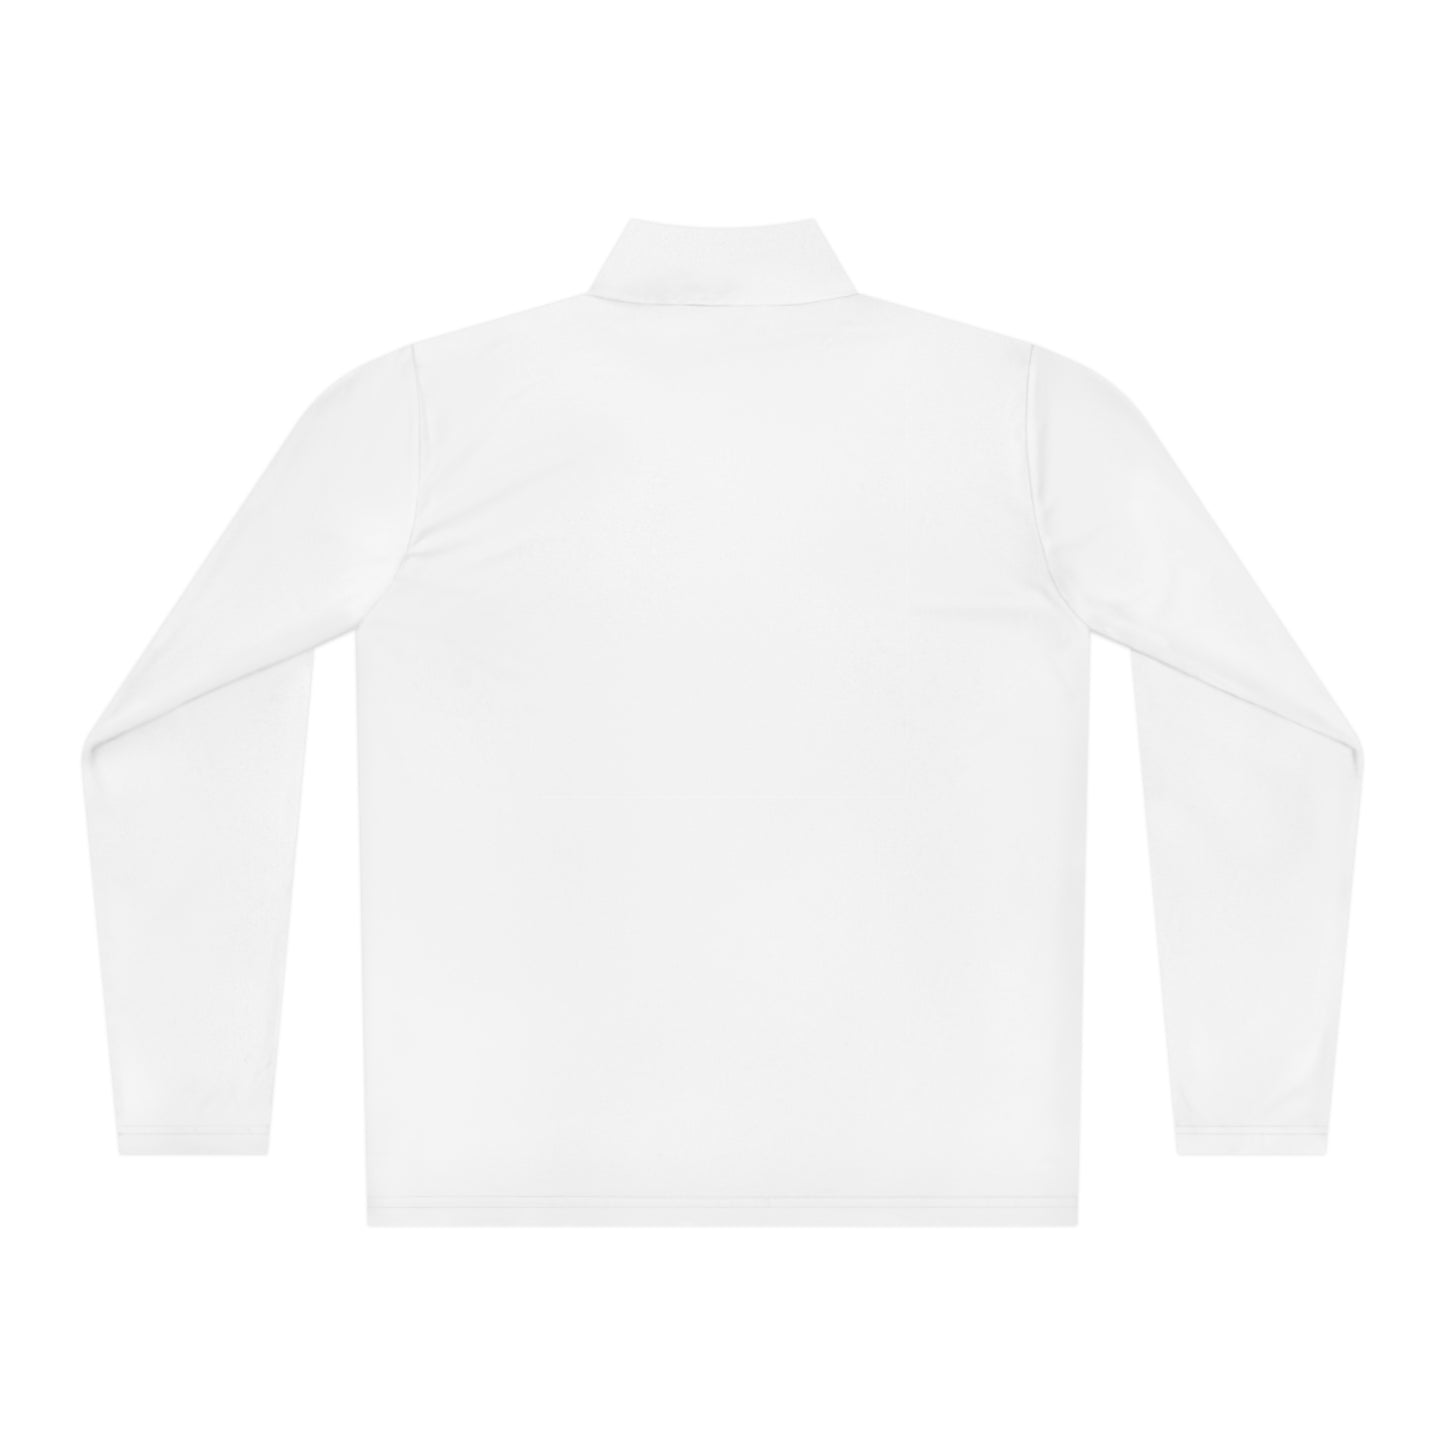 Ath"leisure" Collection- Ath"leisure" Adult Unisex Quarter-Zip Pullover